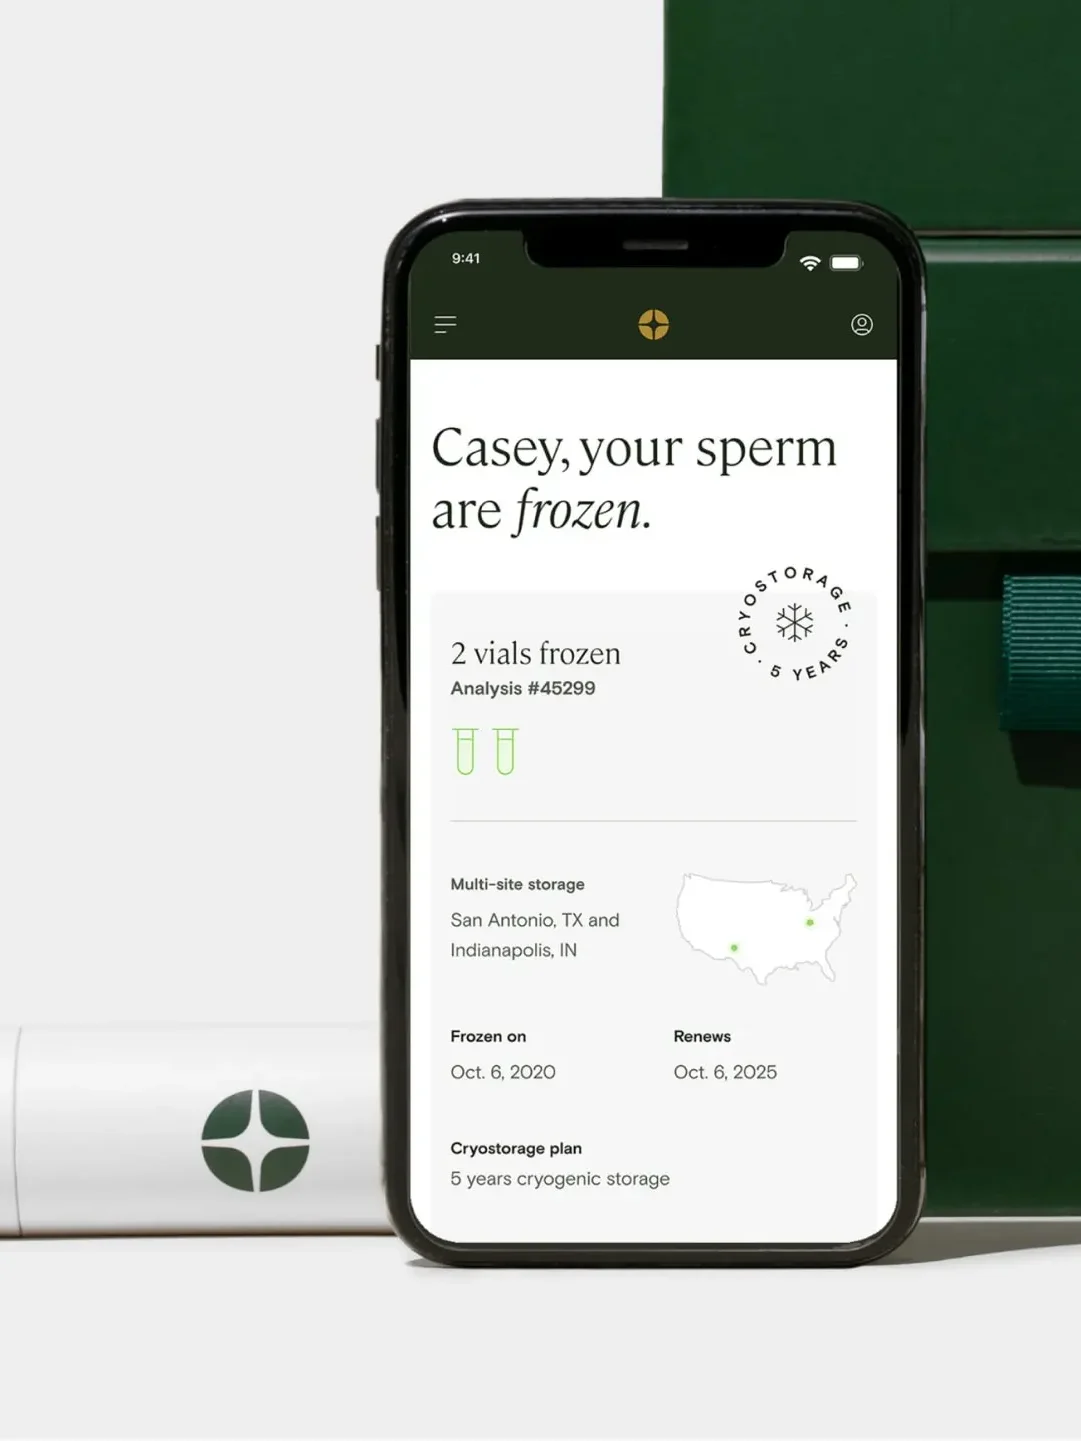 Legacy at-home fertility testing materials and app 